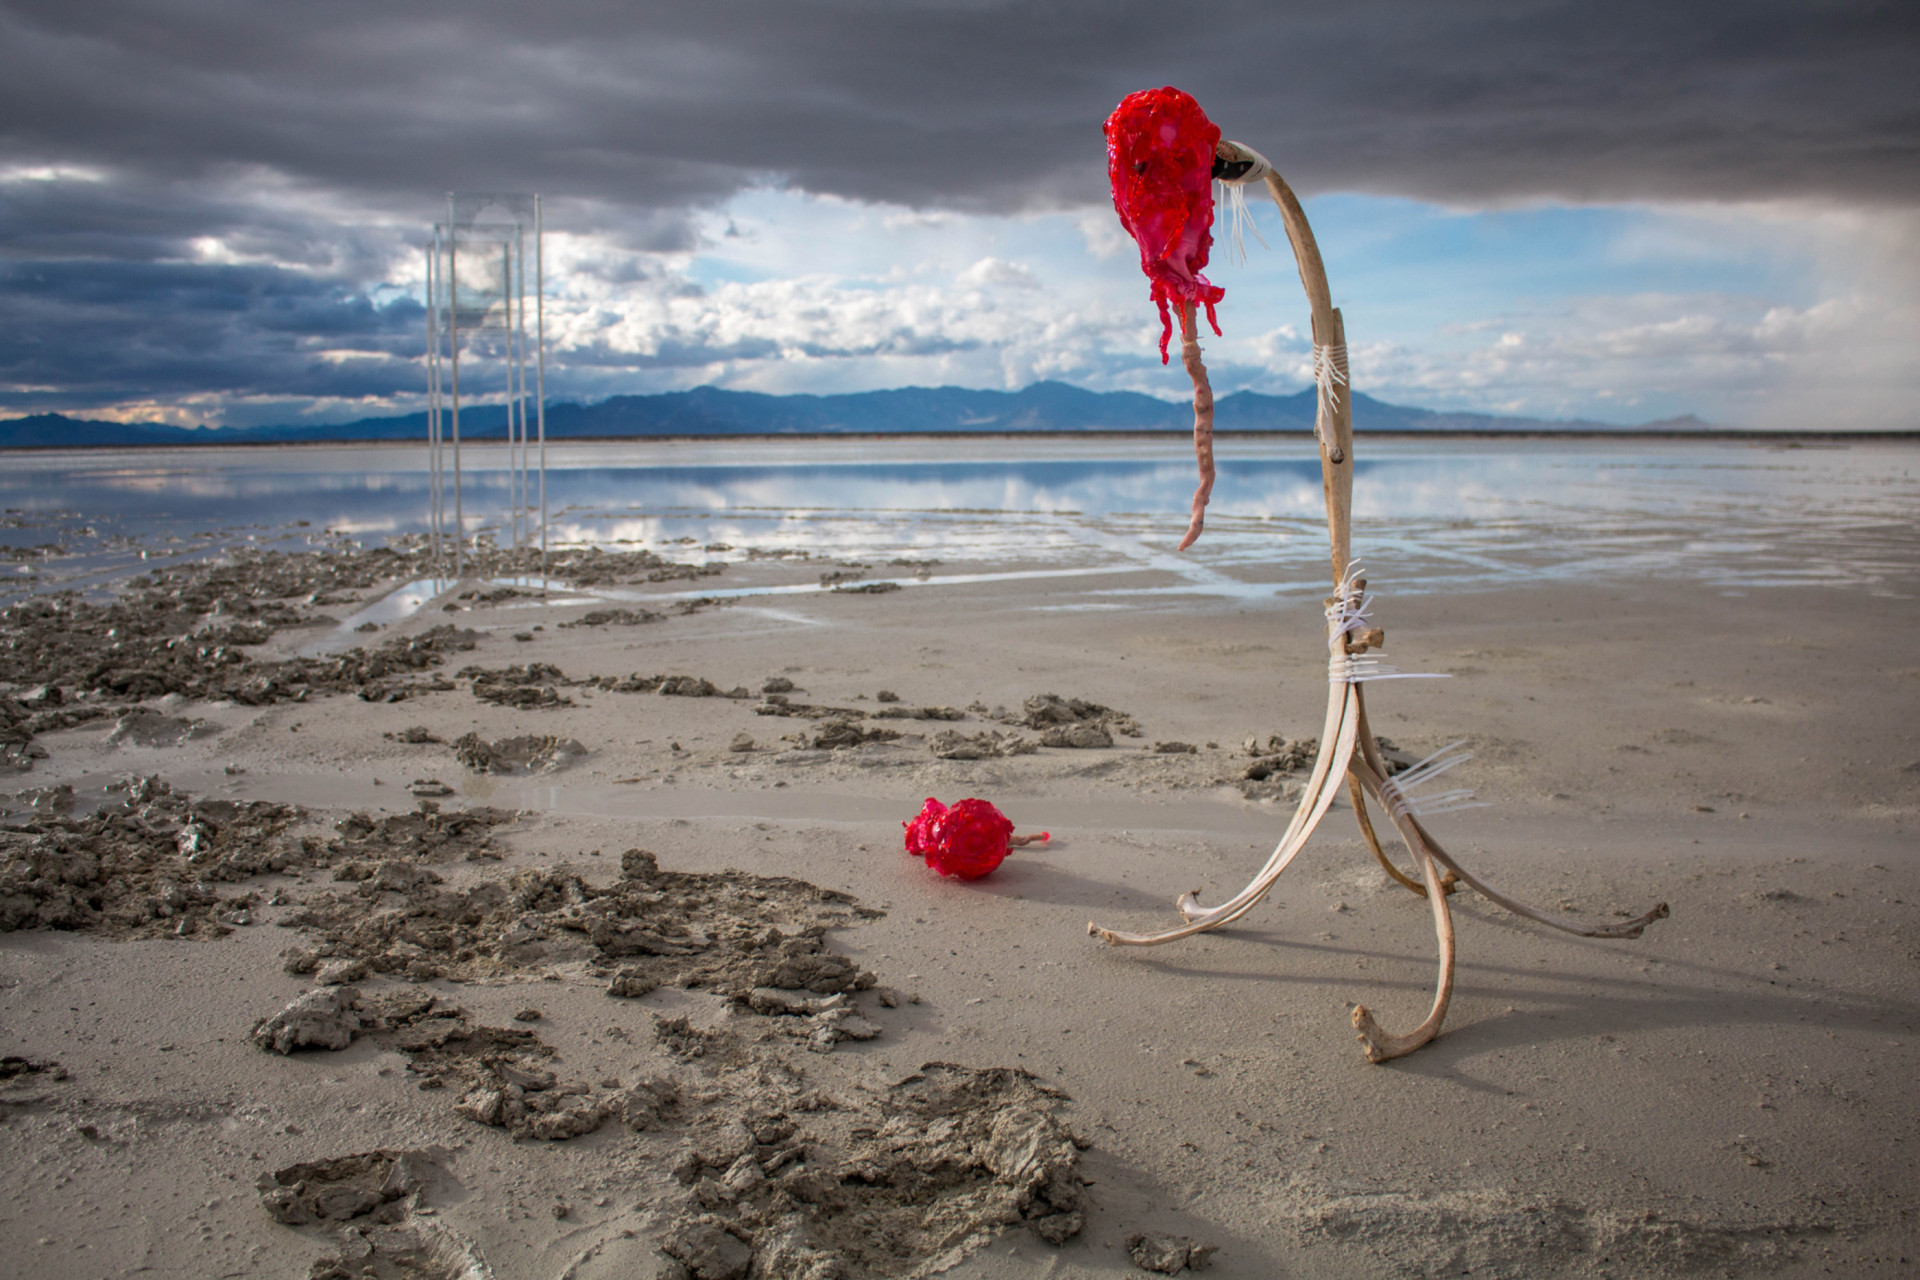 A spindly sculpture of bone with a blob of melted red plastic at the top stands on the sand by the water